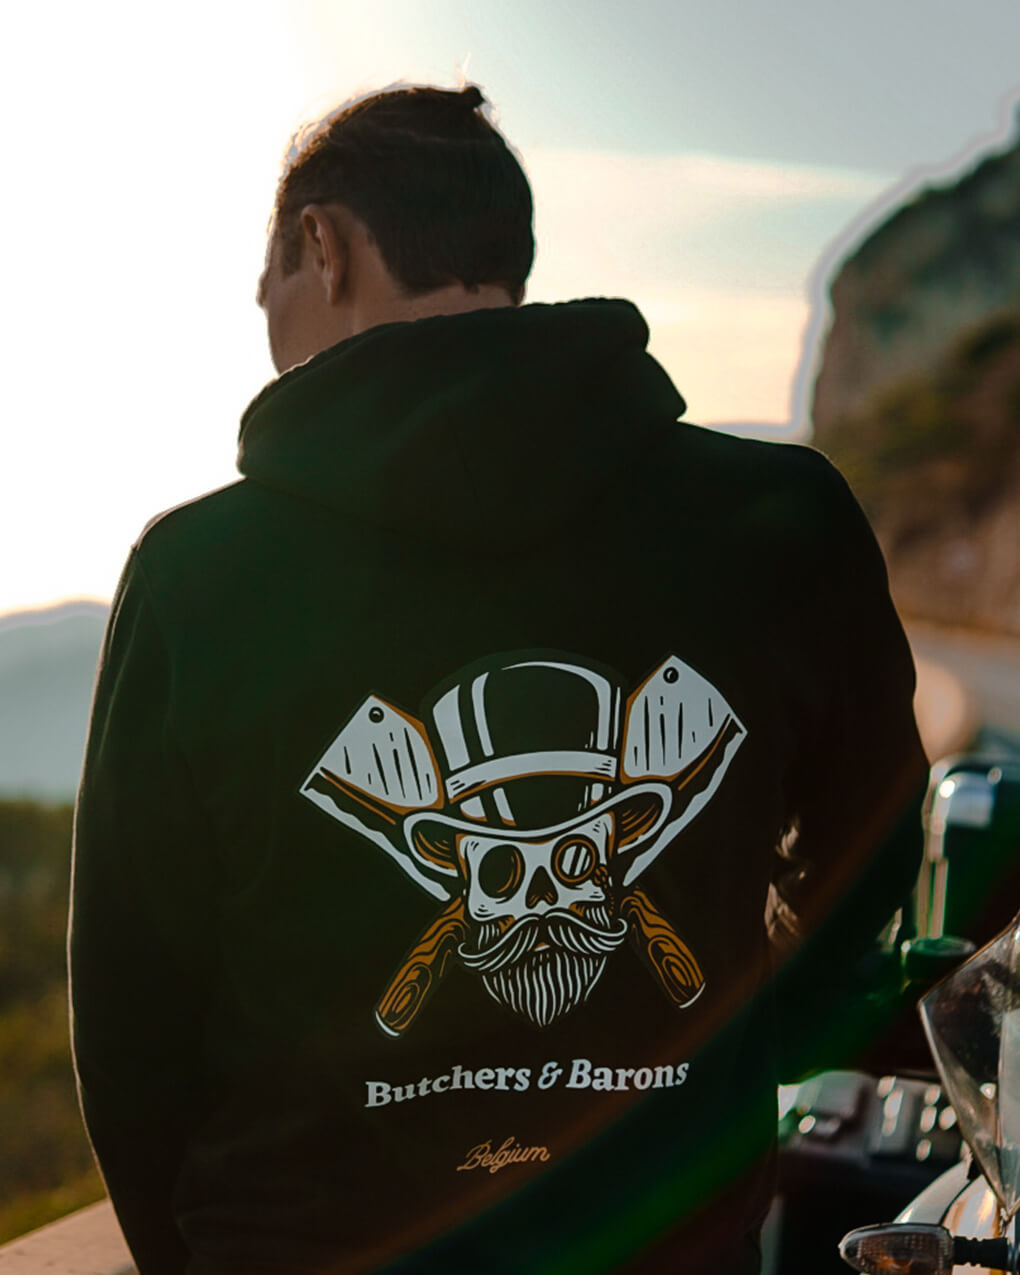 Loyalty black hoodie by Butchers & Barons with skull, beard and monocle.